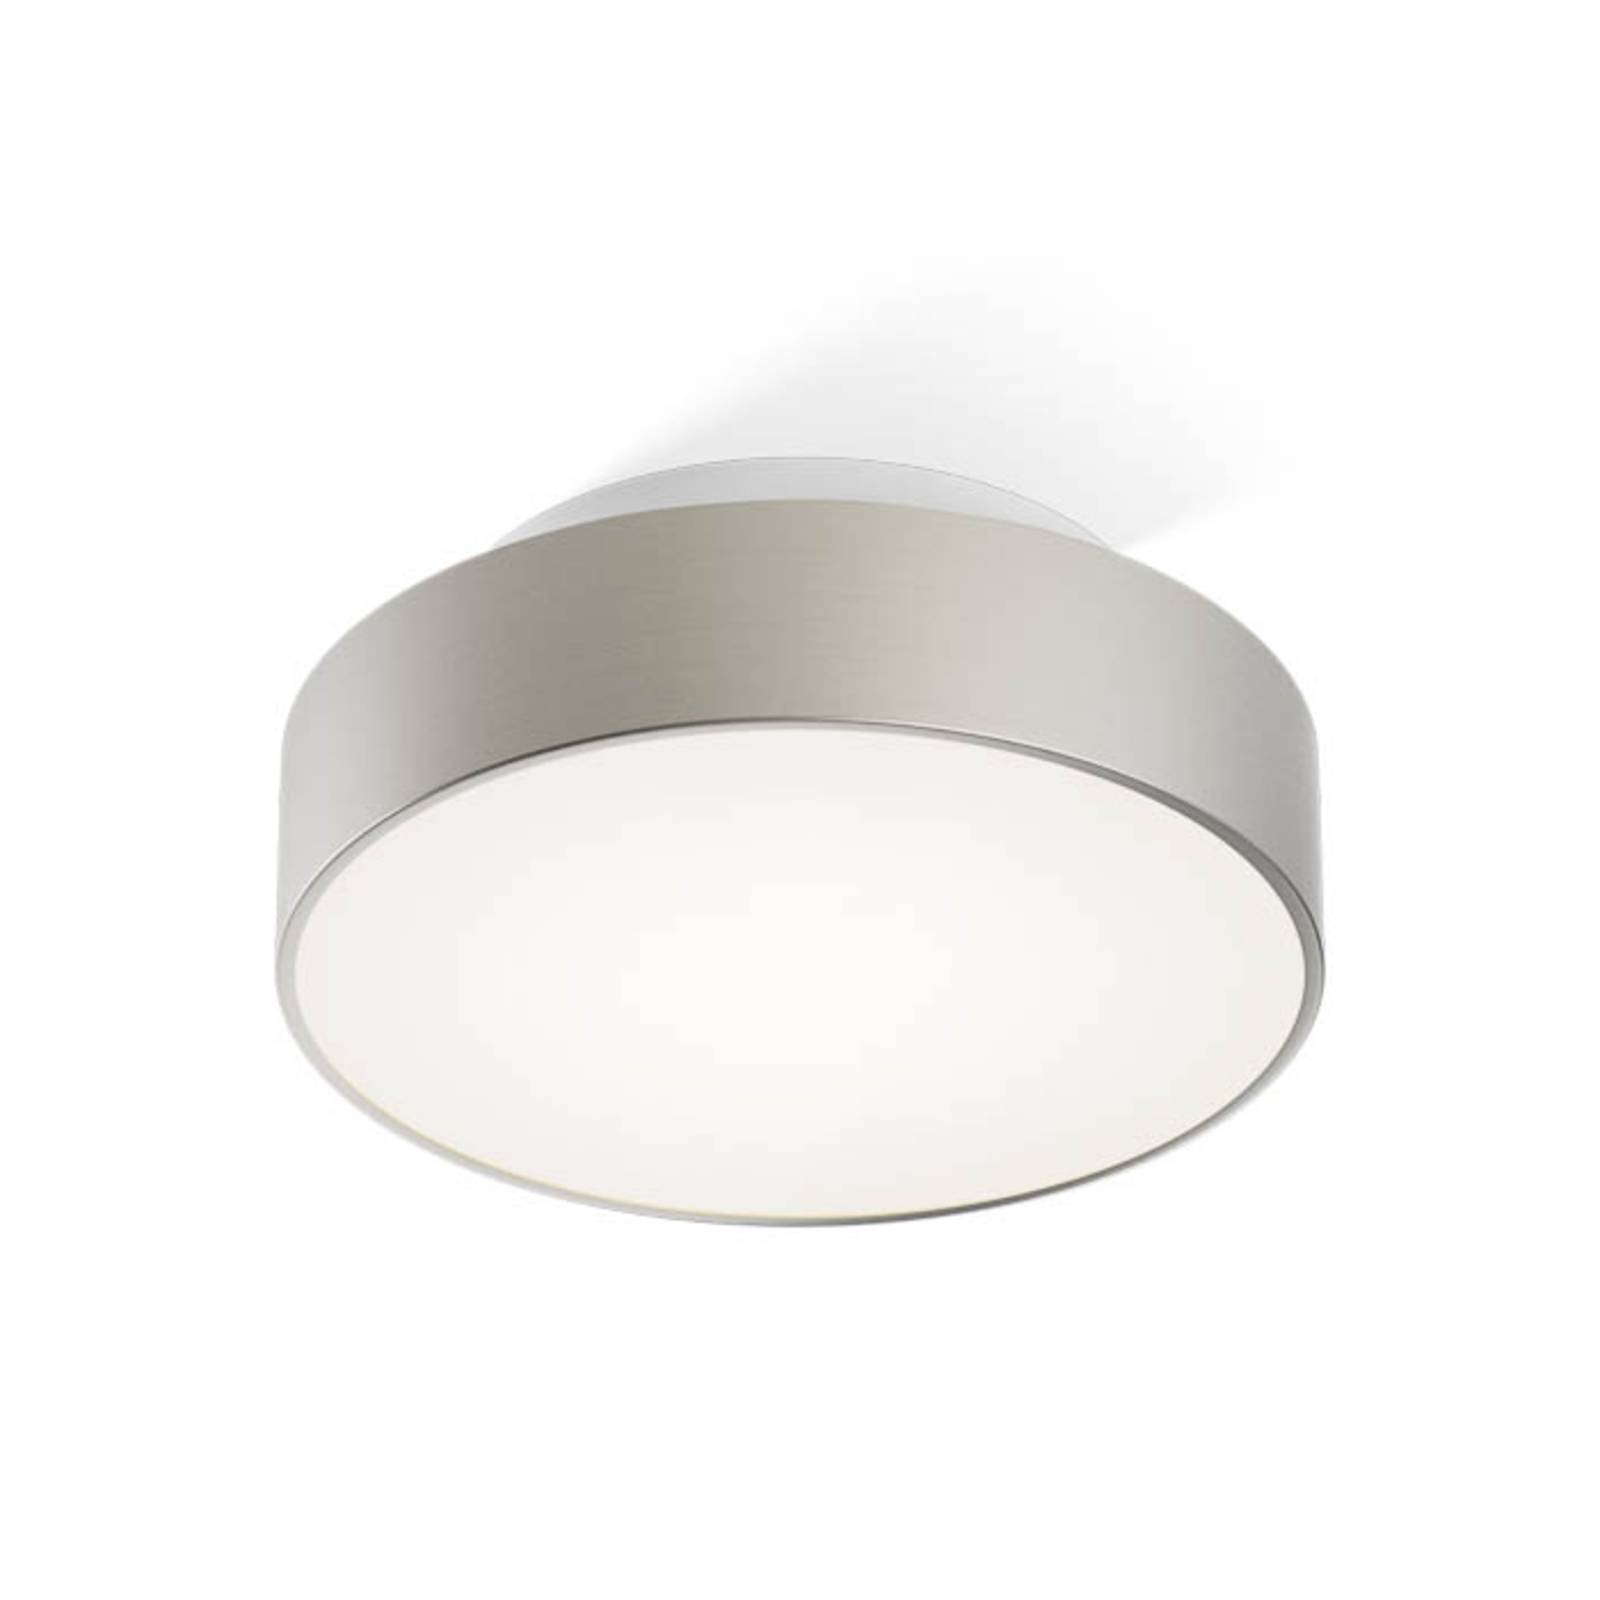 Decor Walther Conect LED-taklampa Ø 26 cm nickel